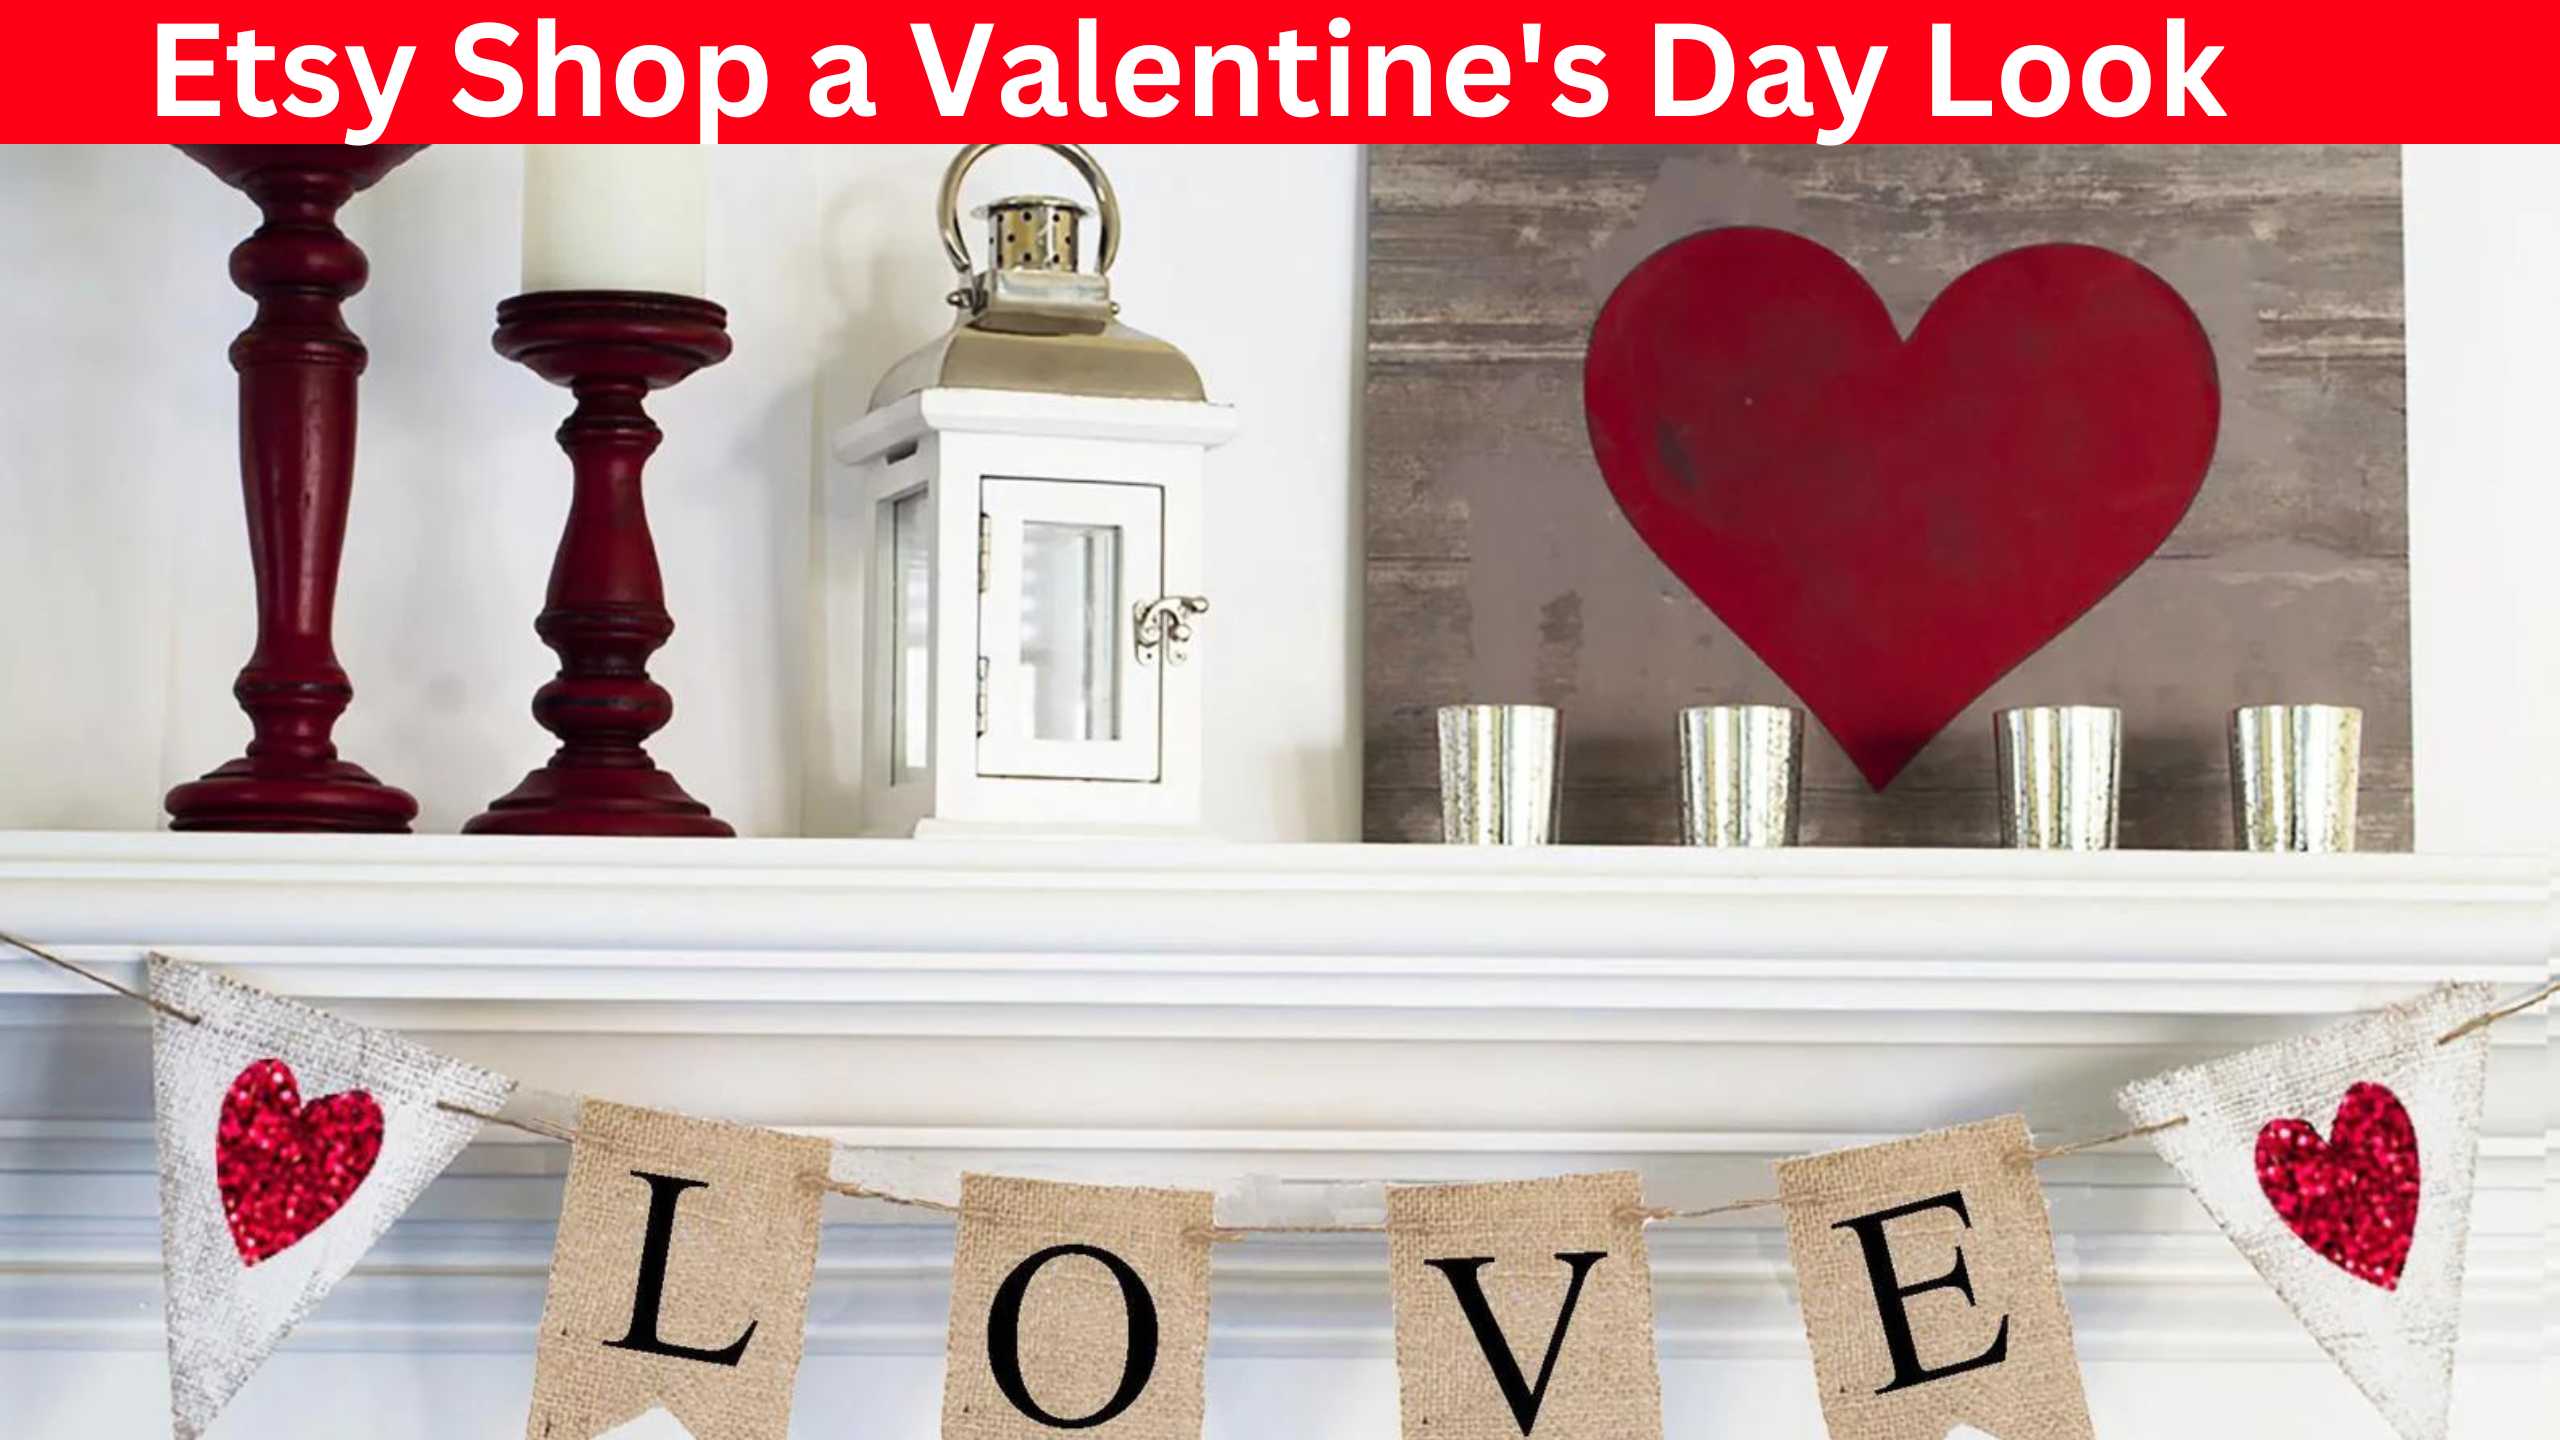 How to Give Your Etsy Shop a Valentine's Day Look